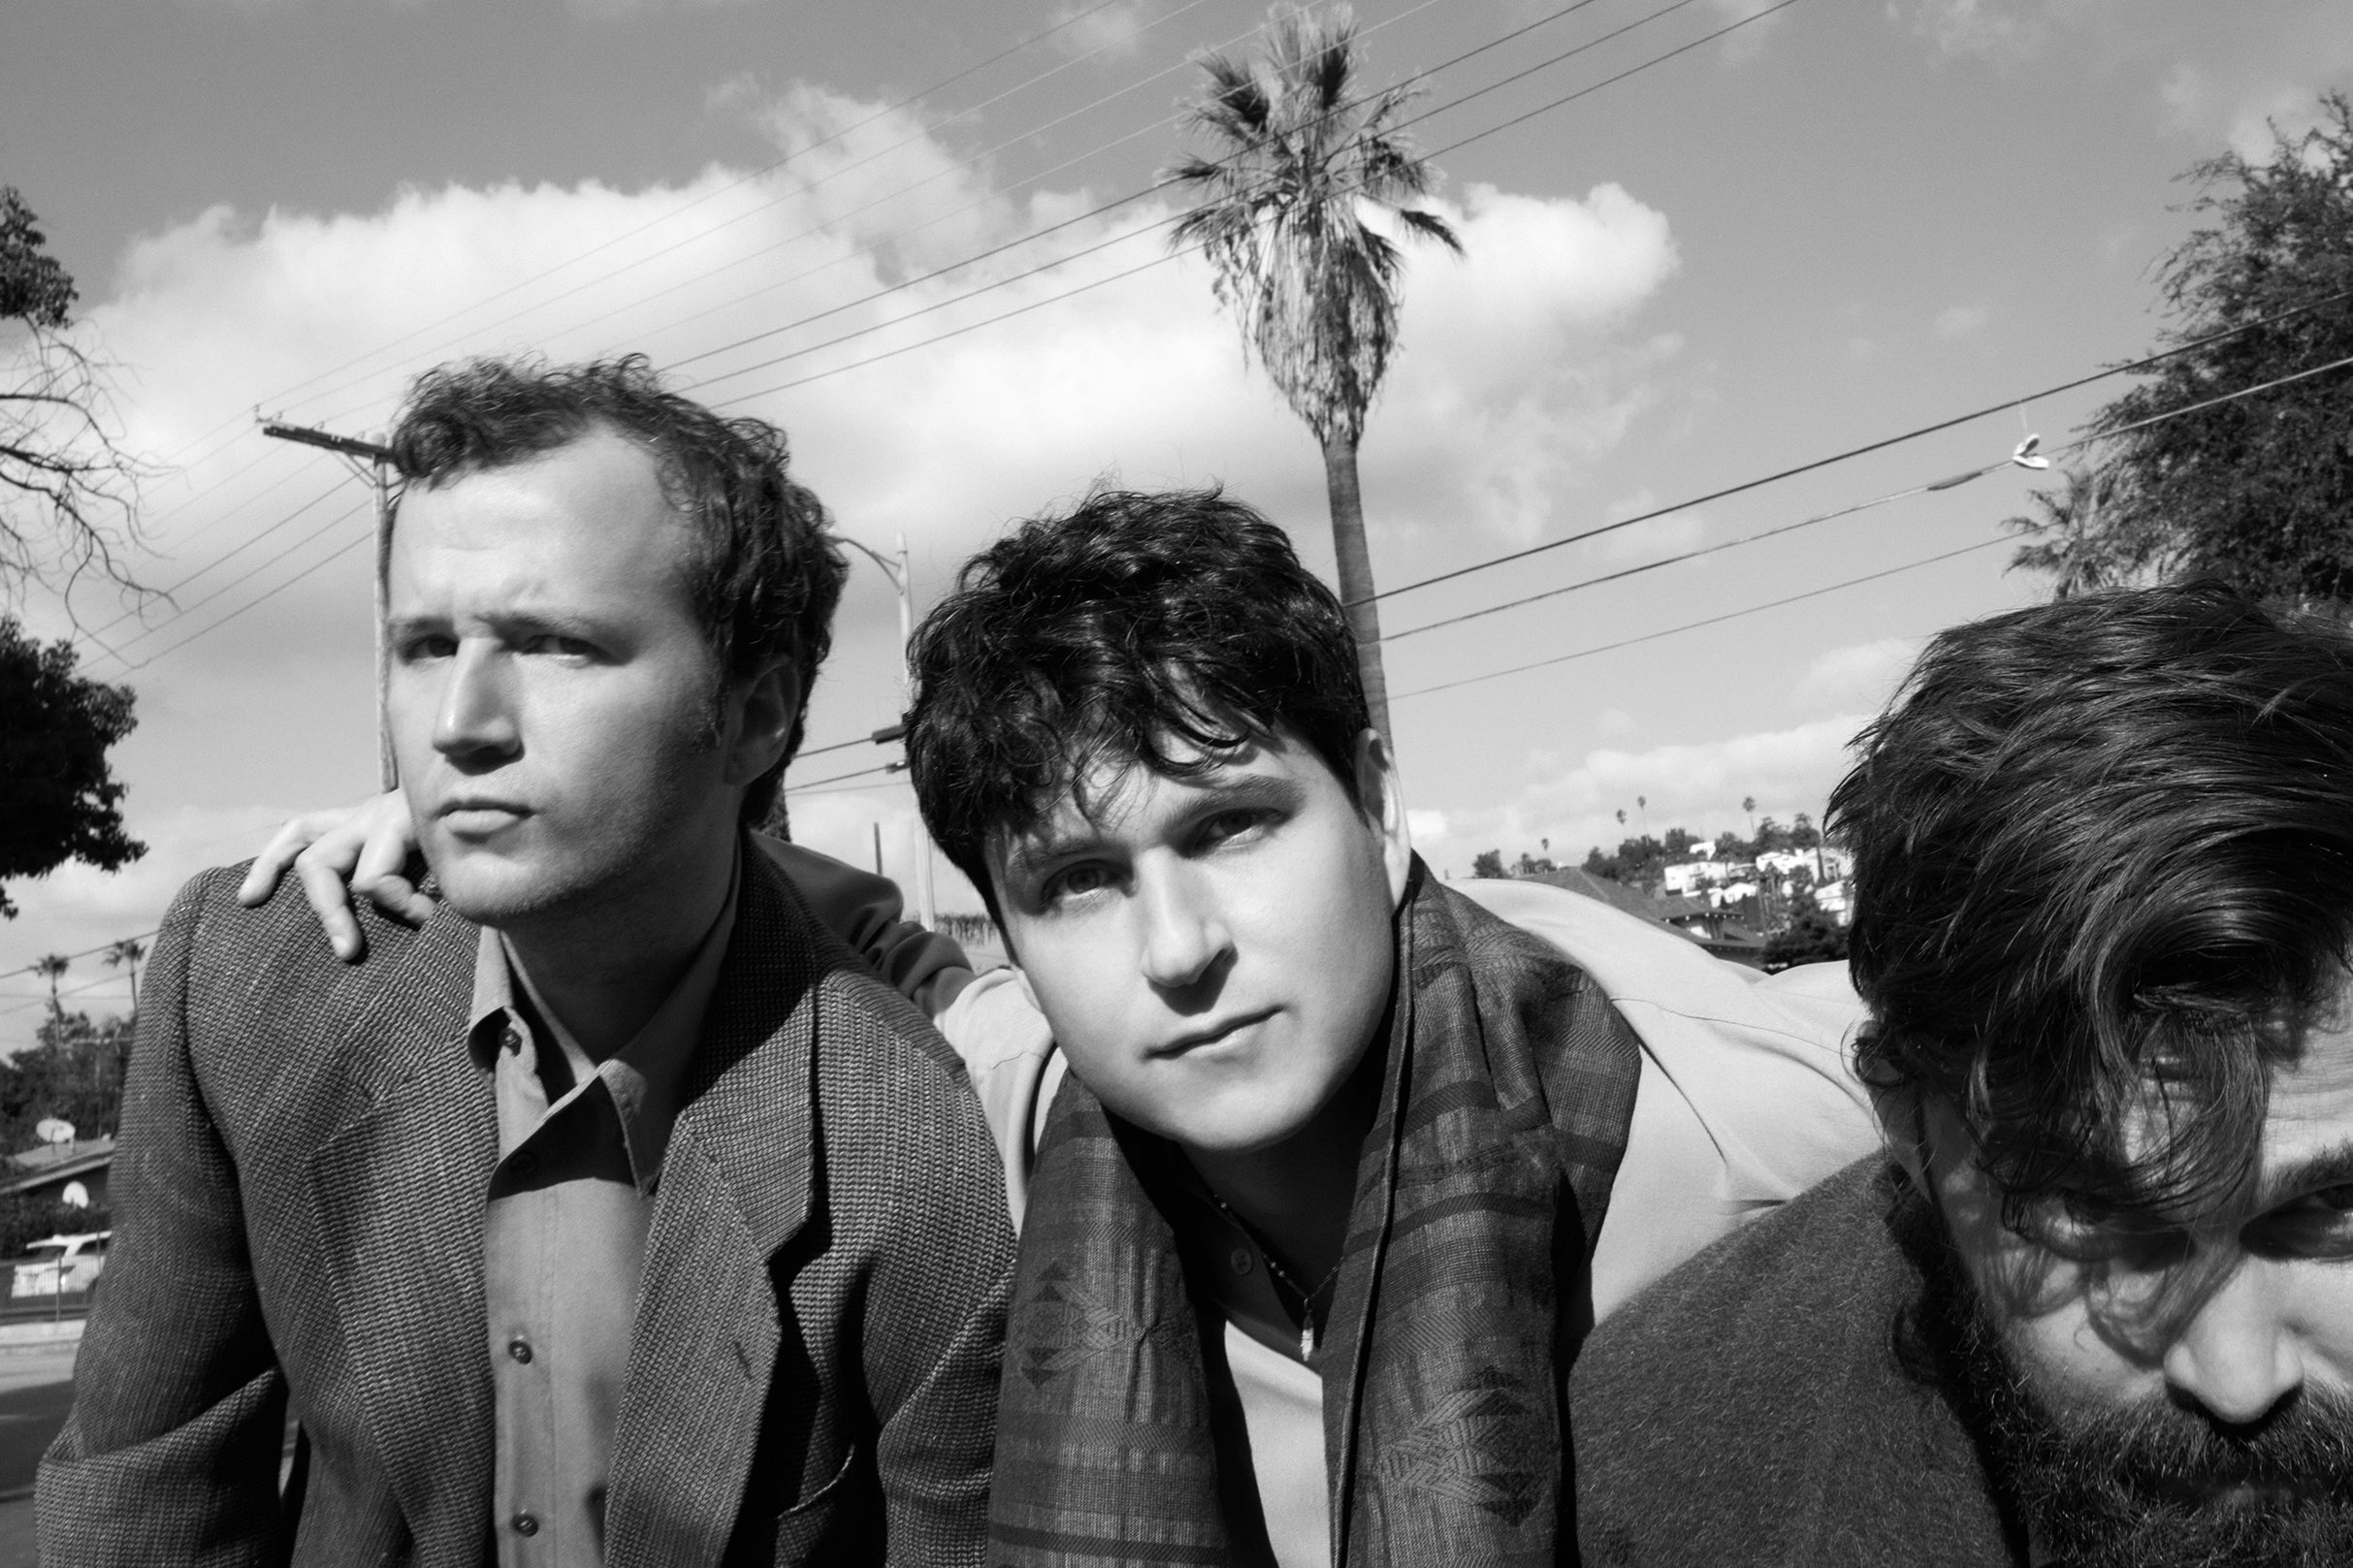 presale code for Vampire Weekend - 'Only God Was Above Us' Tour tickets in New York at Madison Square Garden